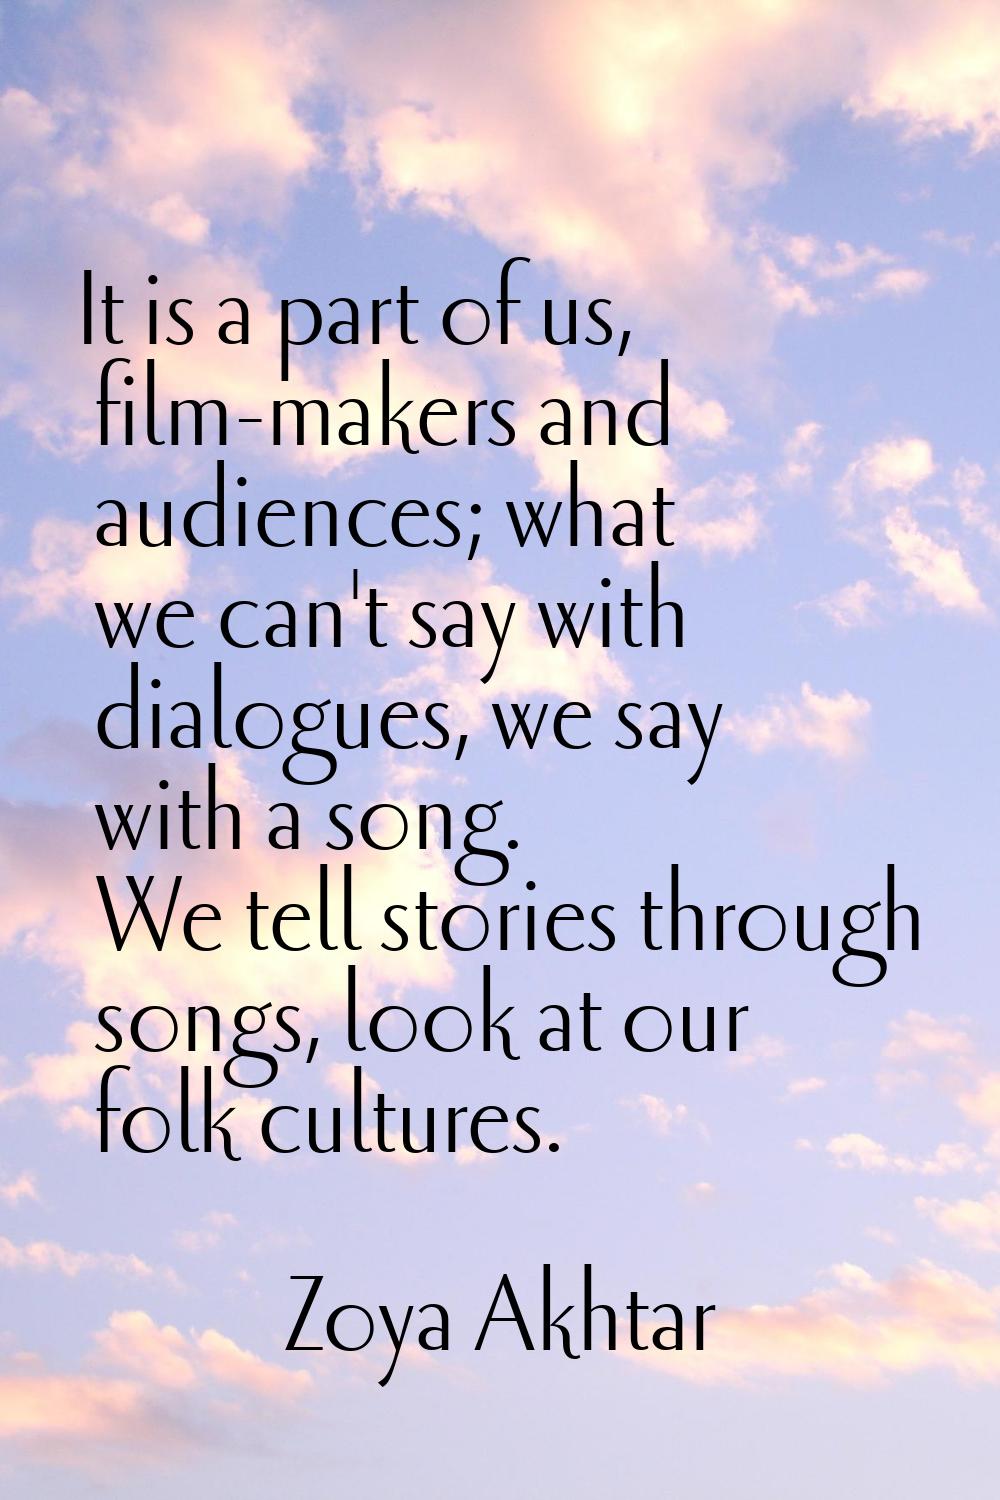 It is a part of us, film-makers and audiences; what we can't say with dialogues, we say with a song